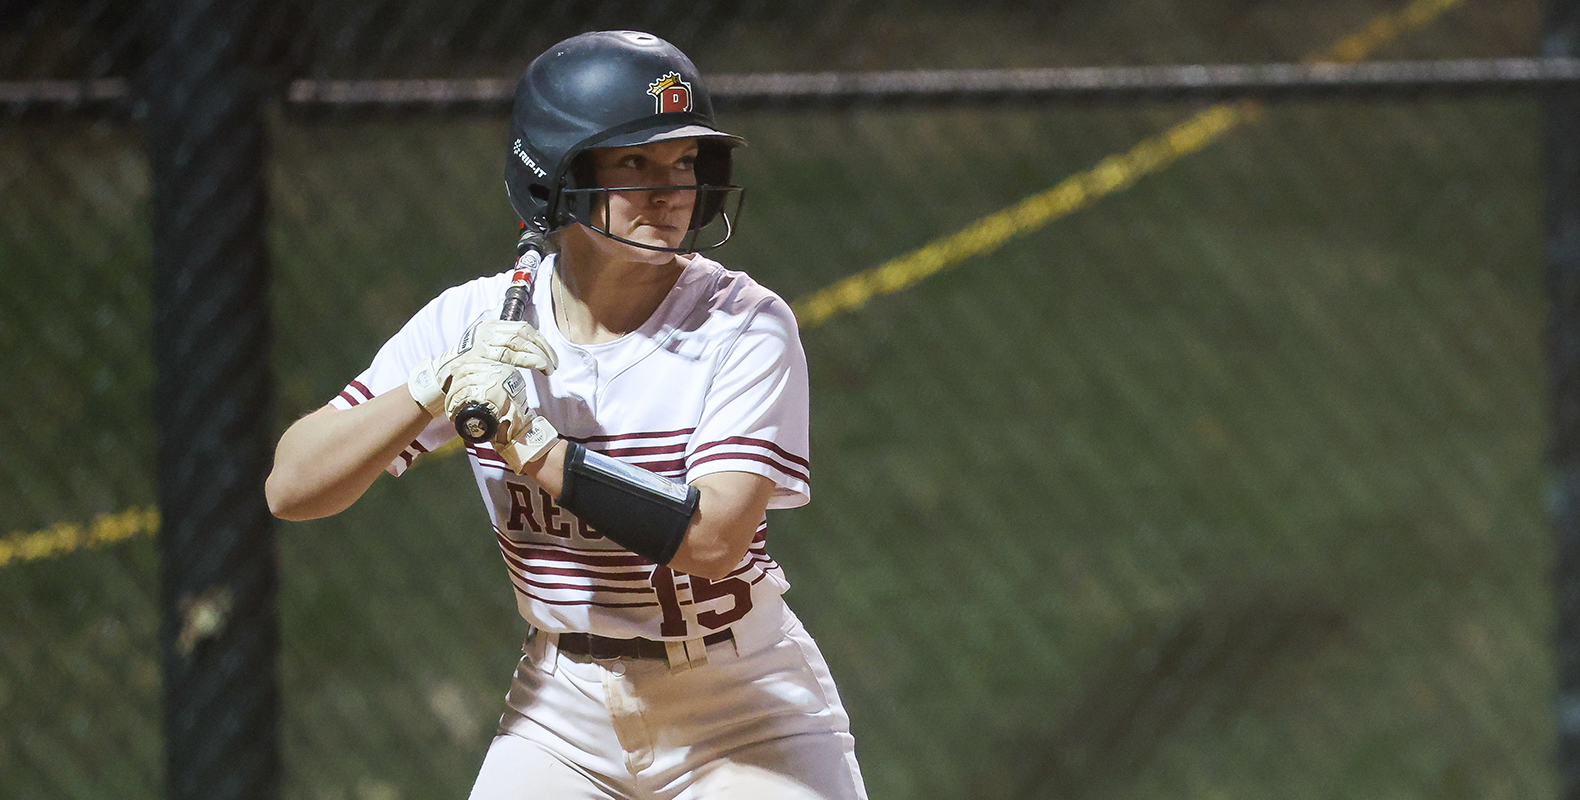 Pride Softball Sees Rally Fall Short in Second Game Tuesday